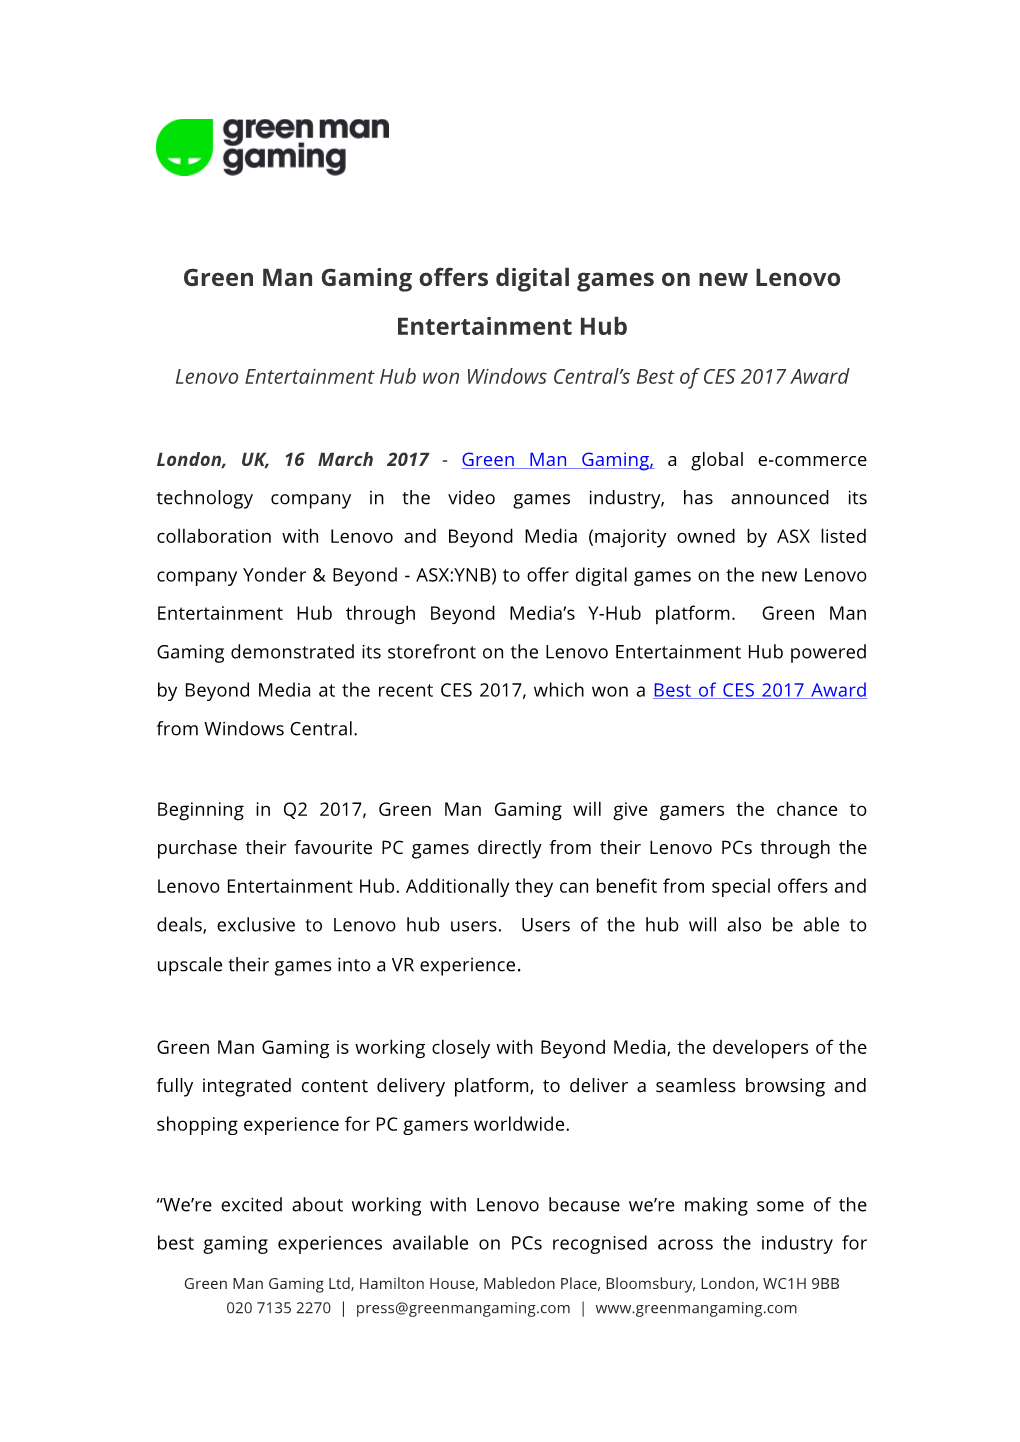 Green Man Gaming Offers Digital Games on New Lenovo Entertainment